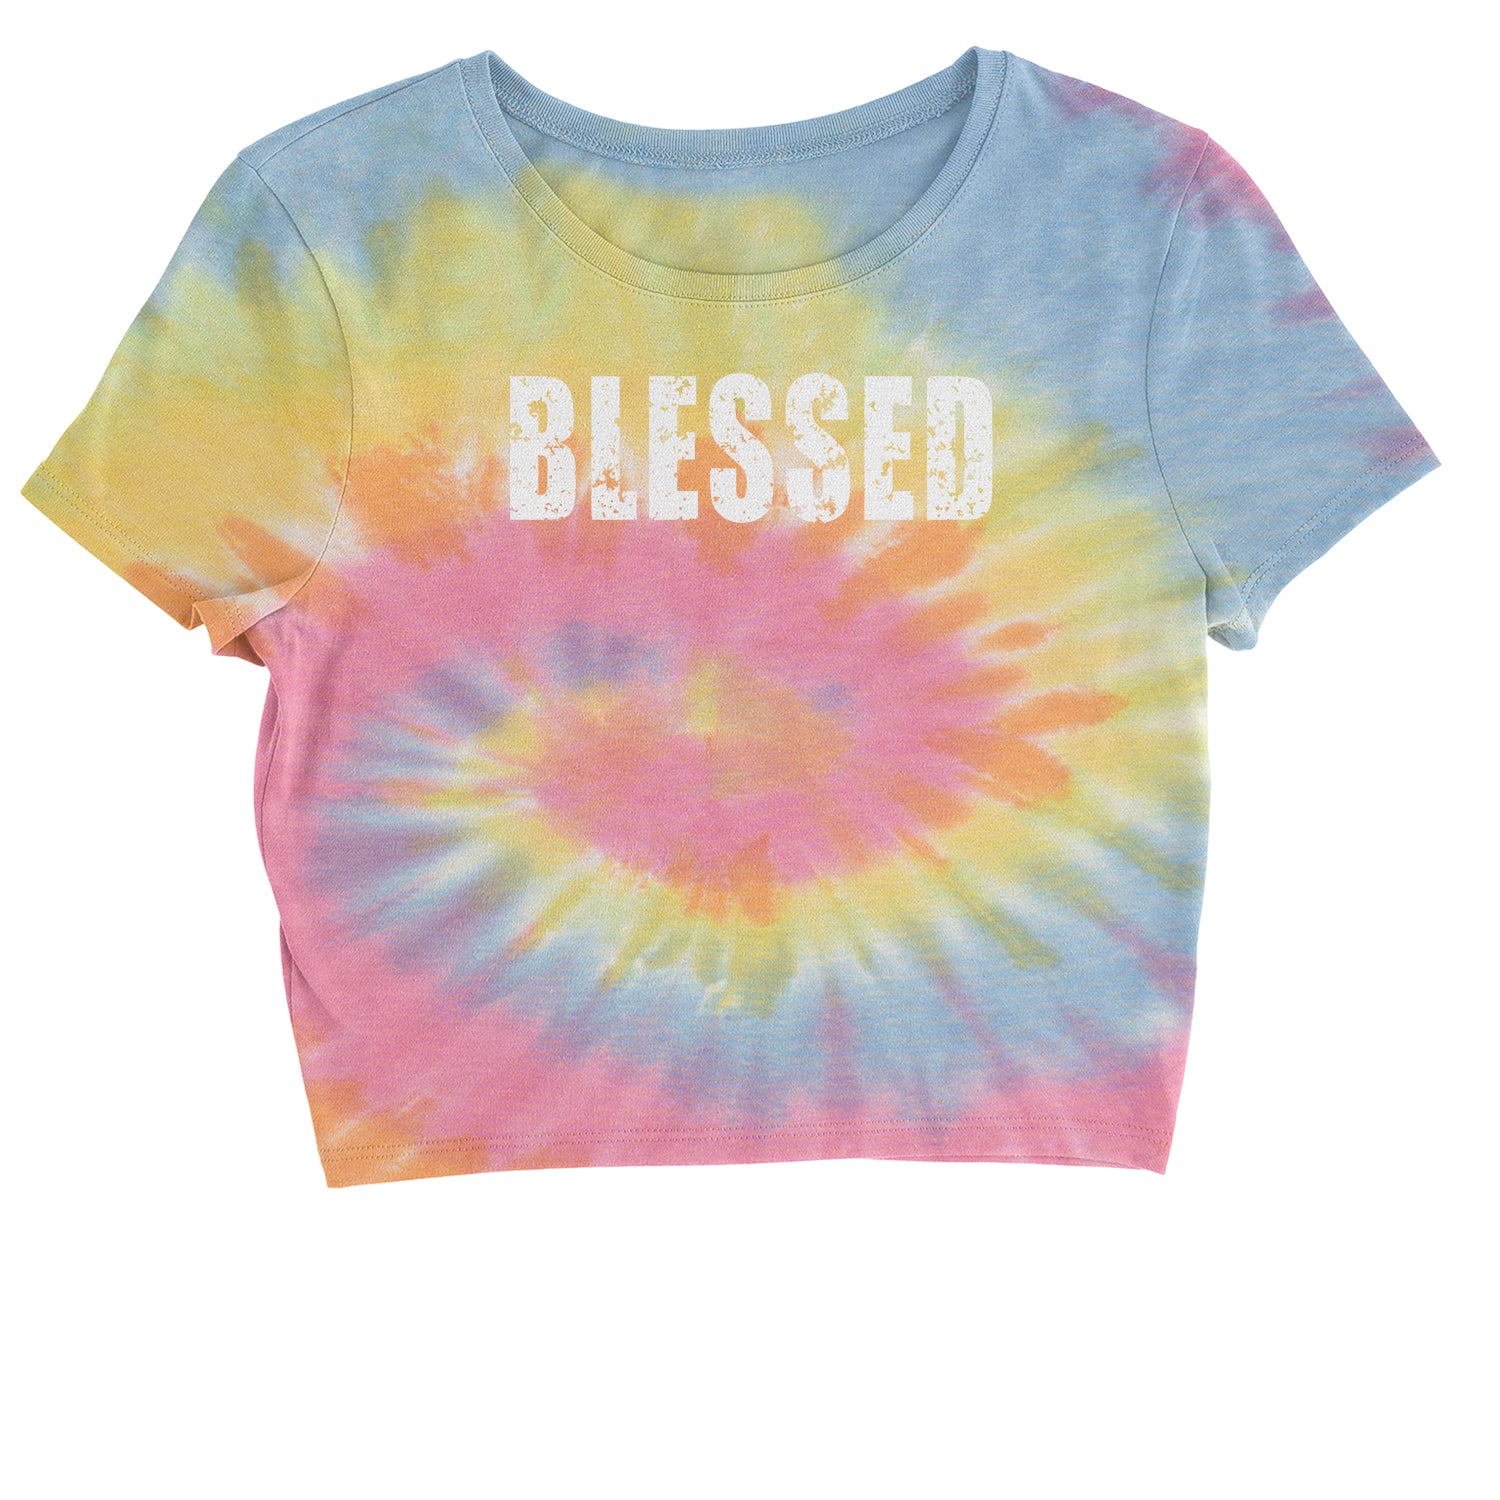 Blessed Religious Grateful Thankful Cropped T-Shirt #expressiontees by Expression Tees